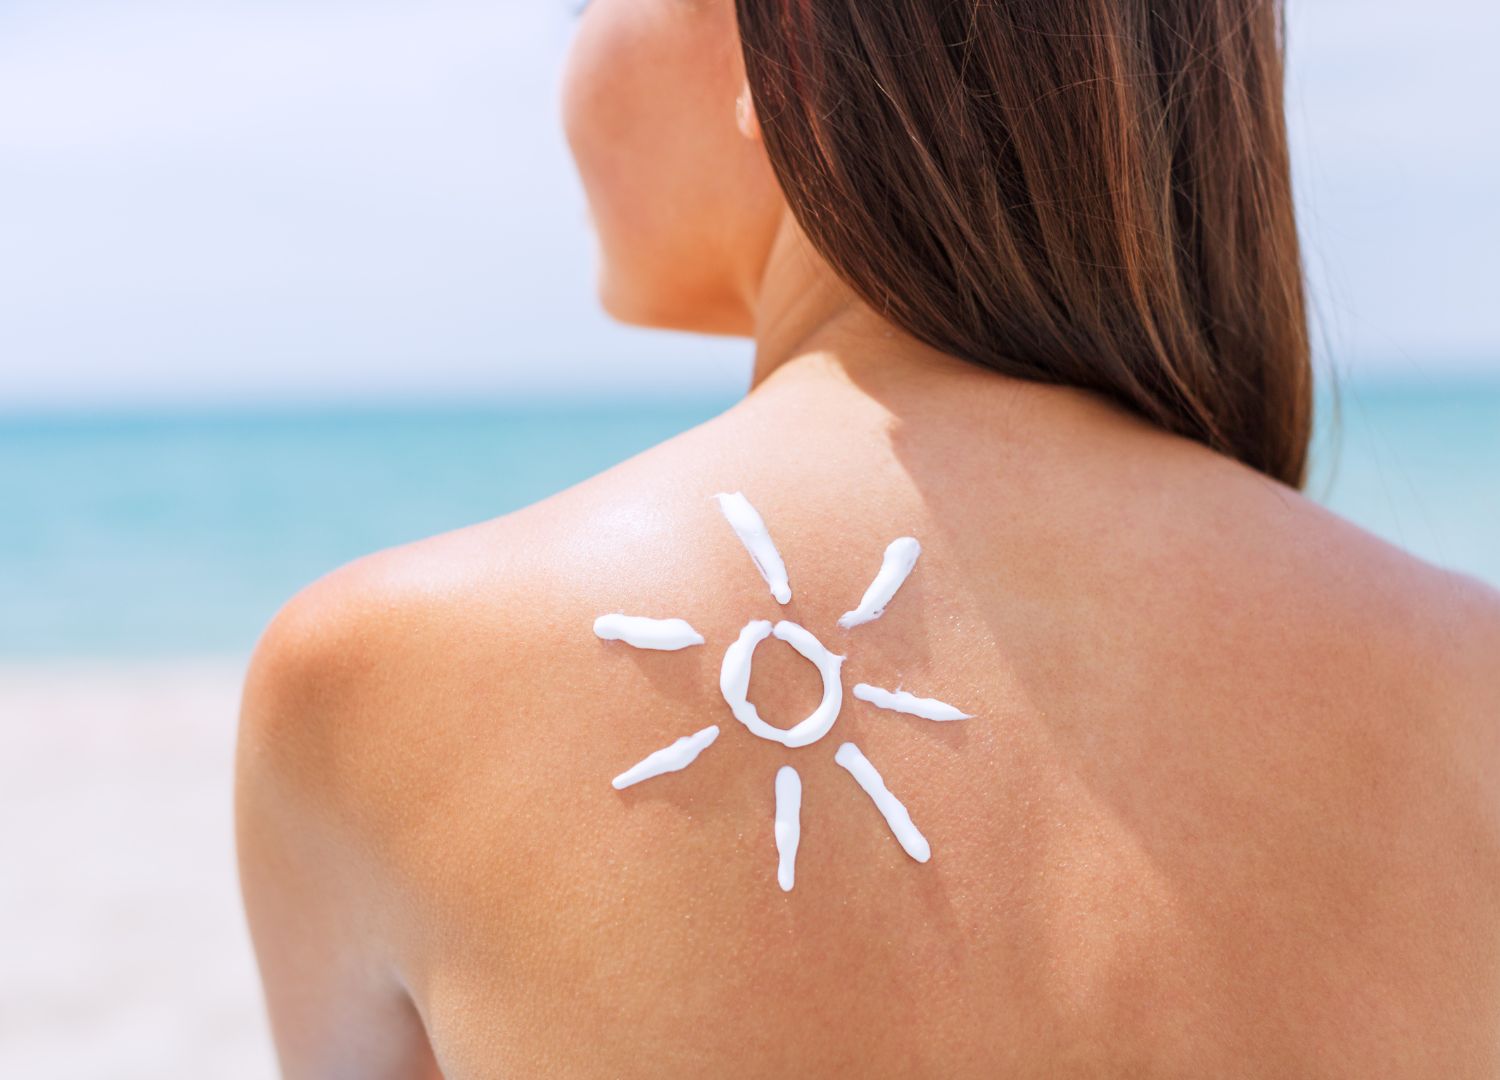 Does Sunscreen really delay skin from aging?